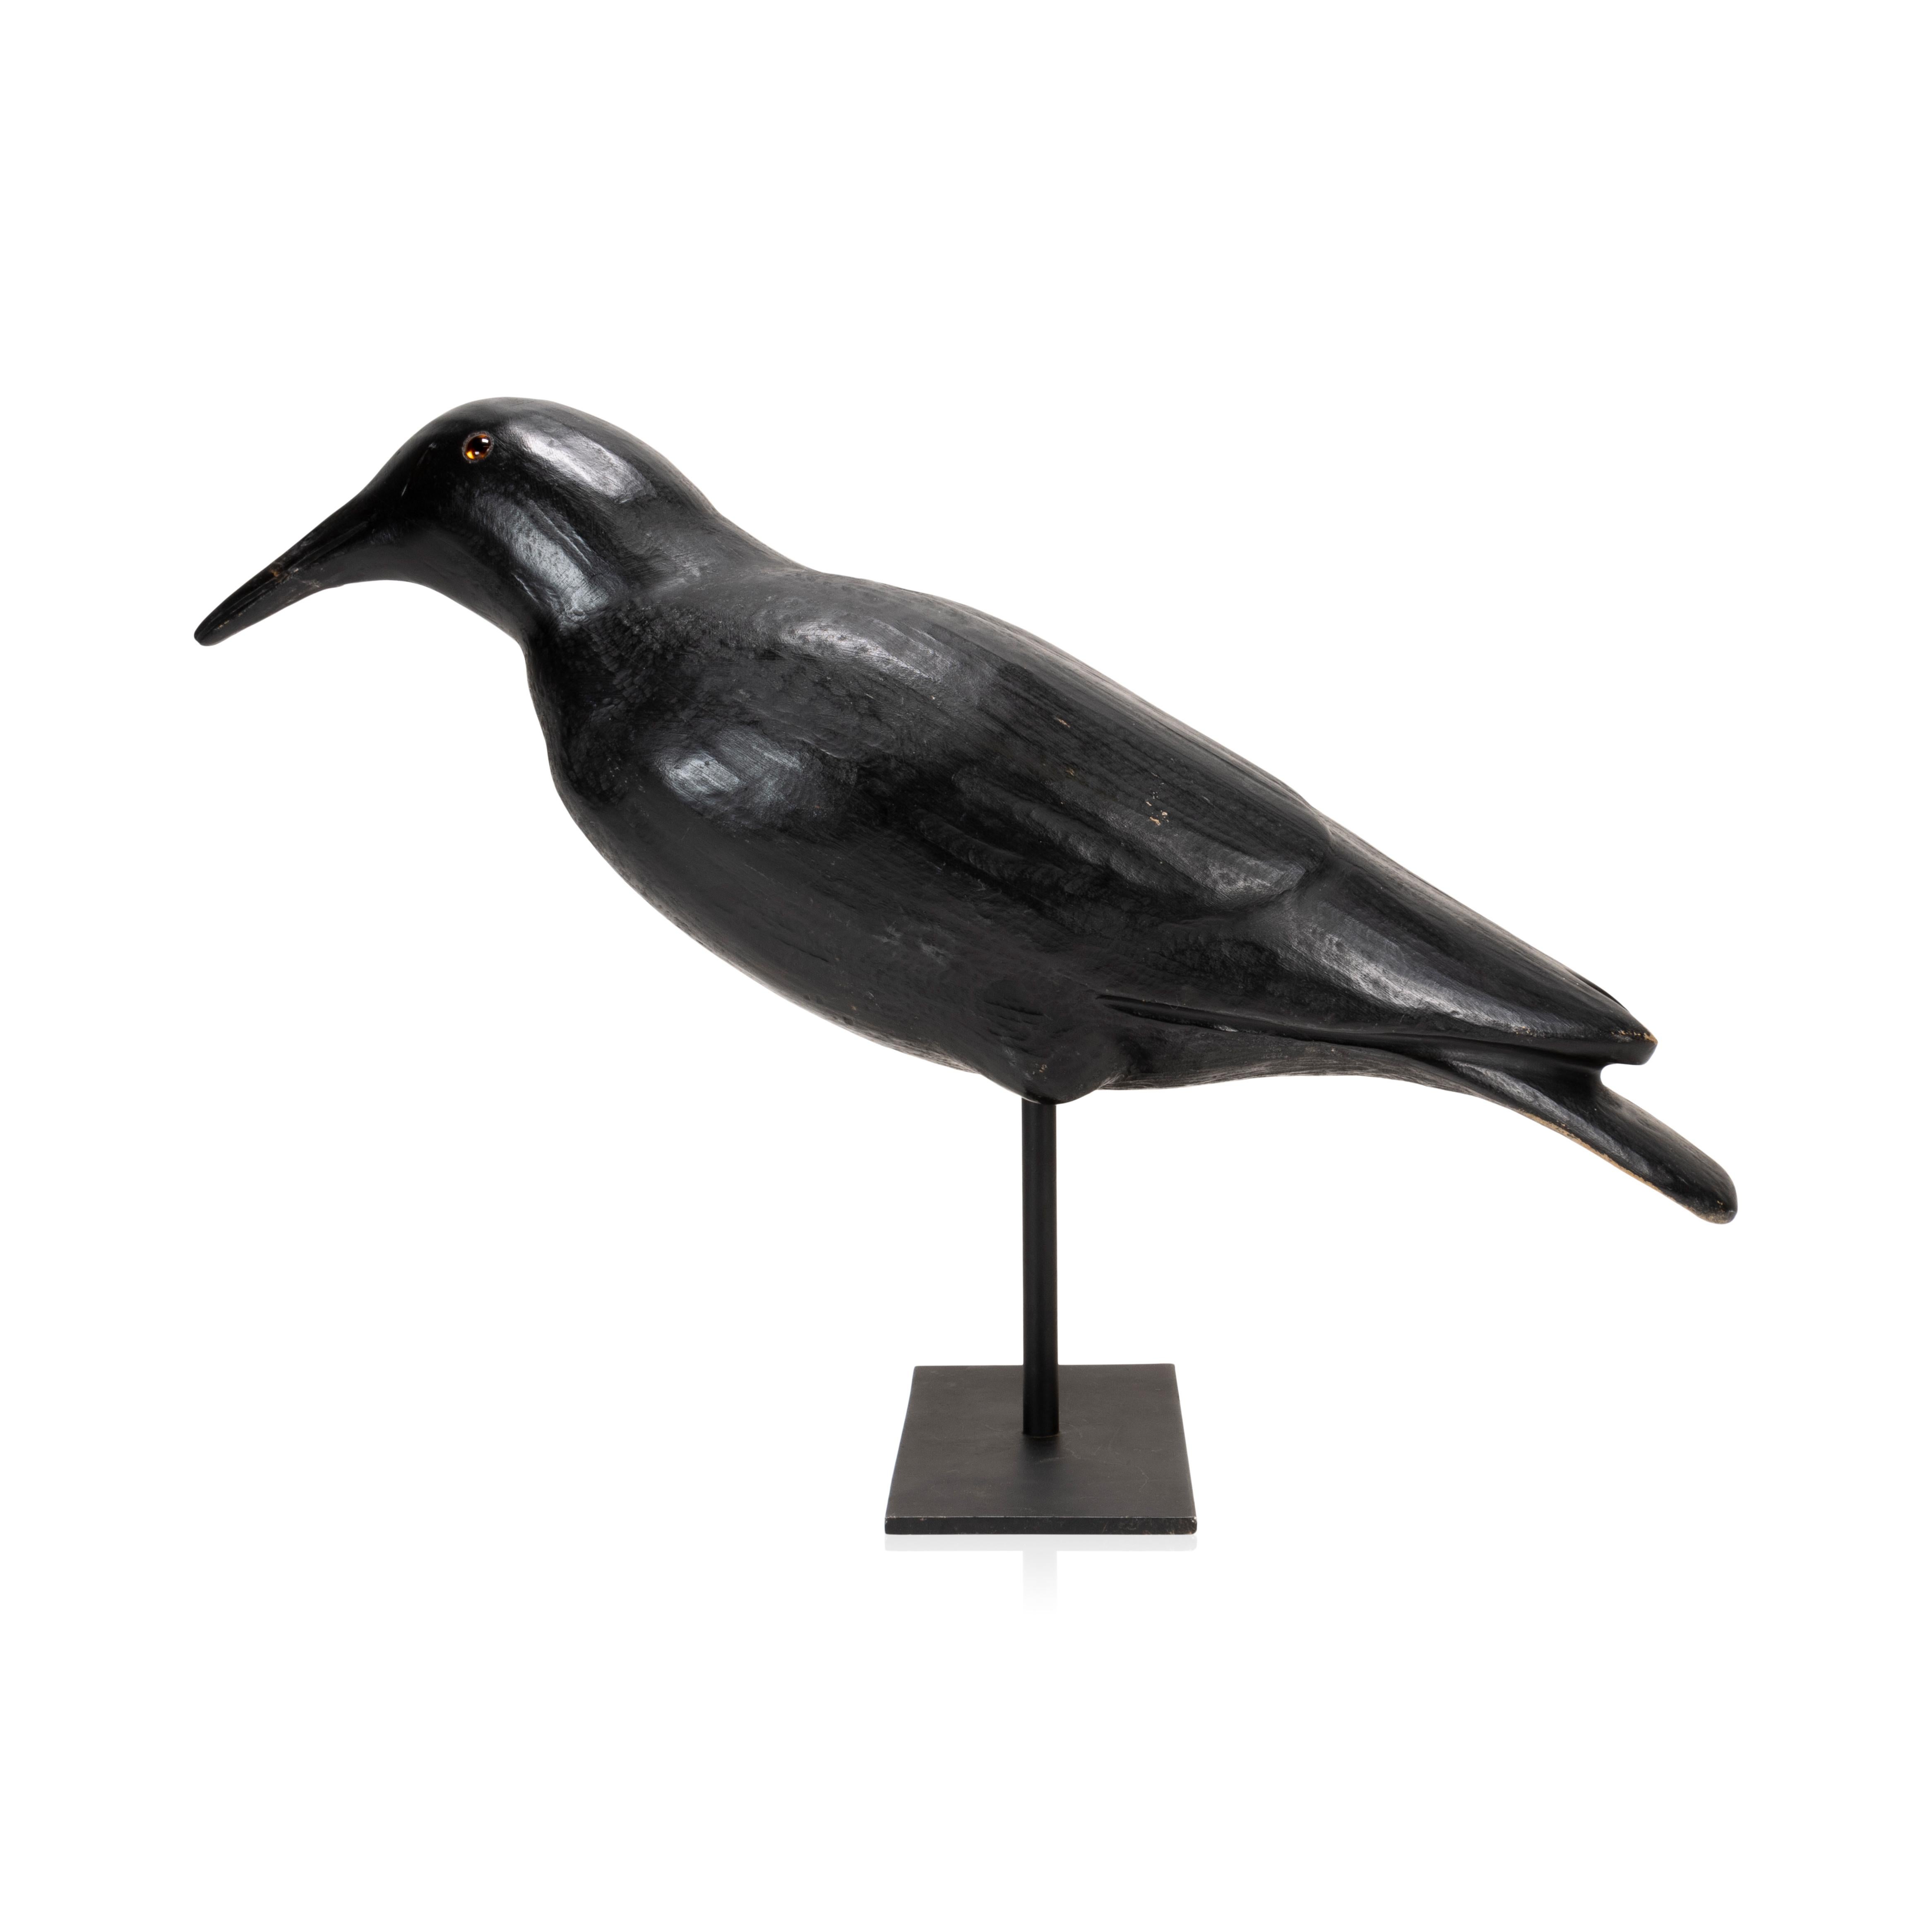 20th Century Crow decoy. Carved and painted on metal base. Glass eyes. Carver unknown.

Period: 20th century
Origin: United States
Size: 18